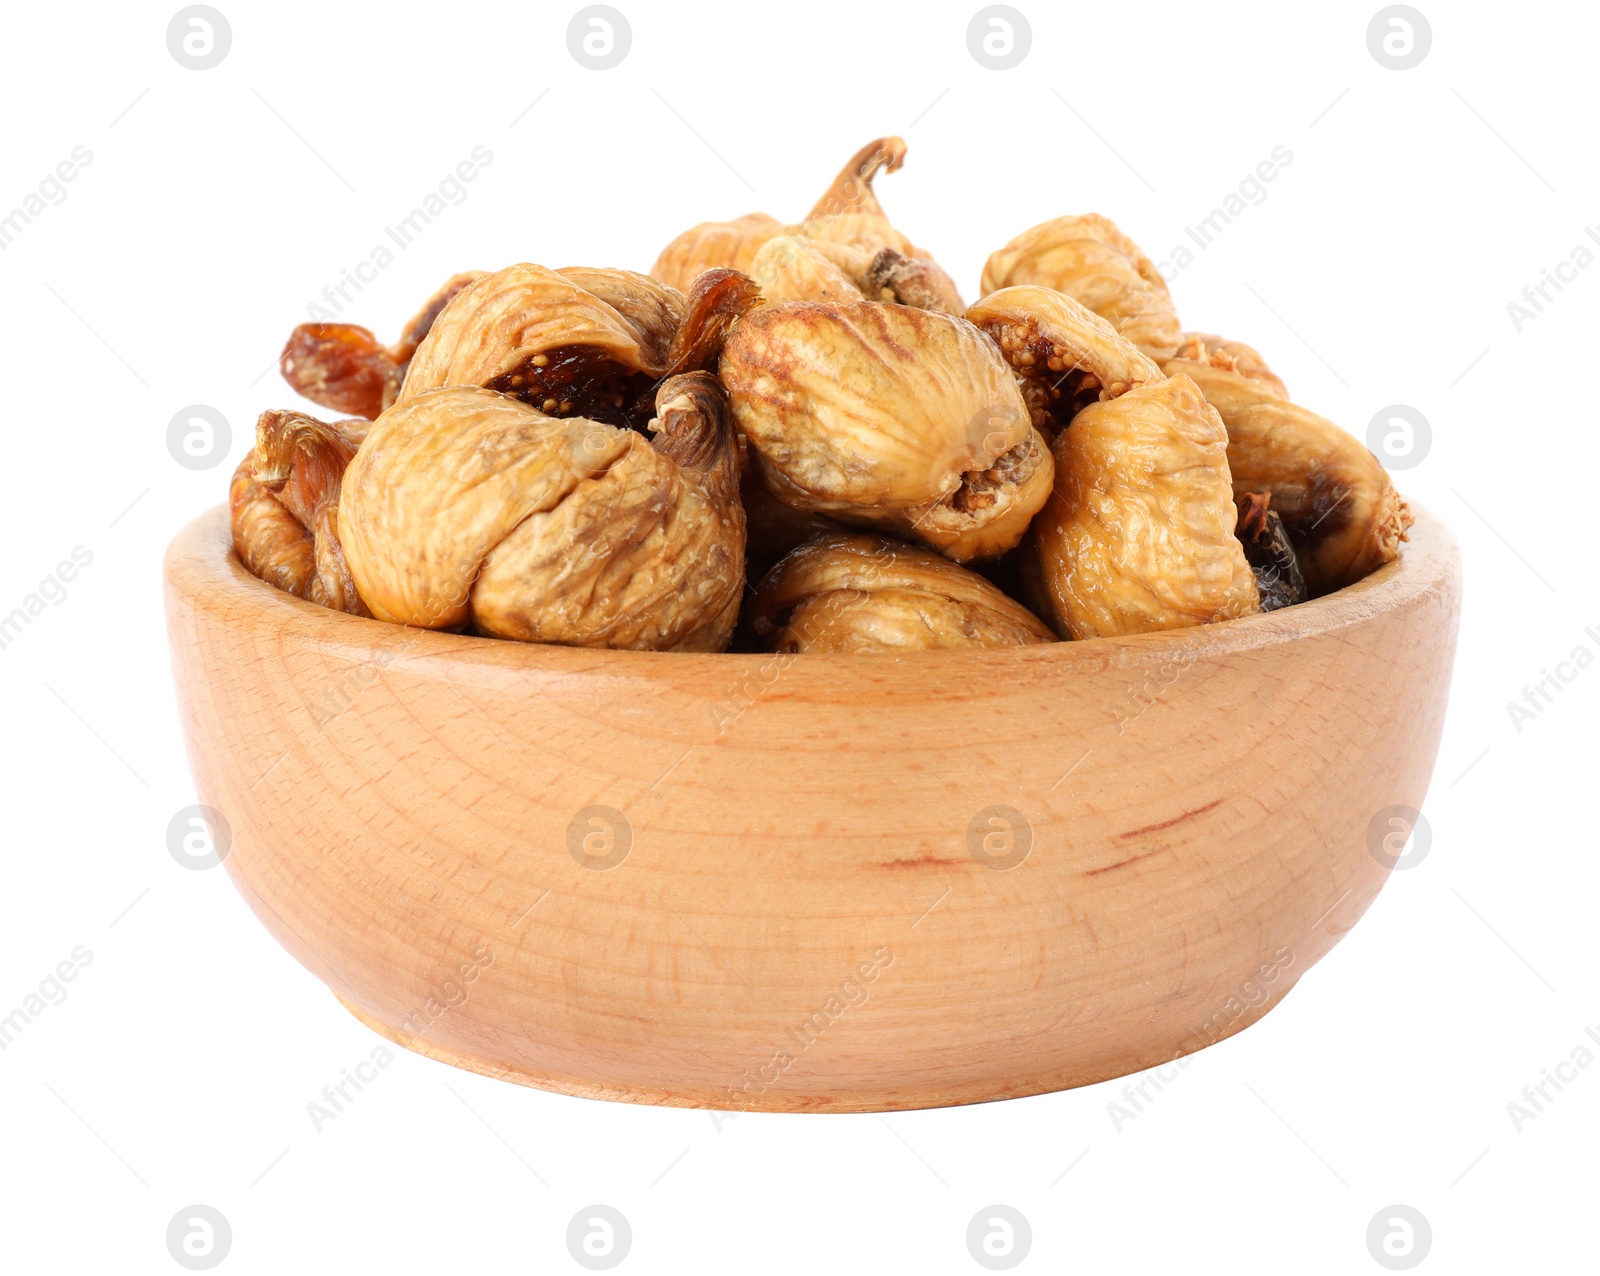 Photo of Wooden bowl of dried figs on white background